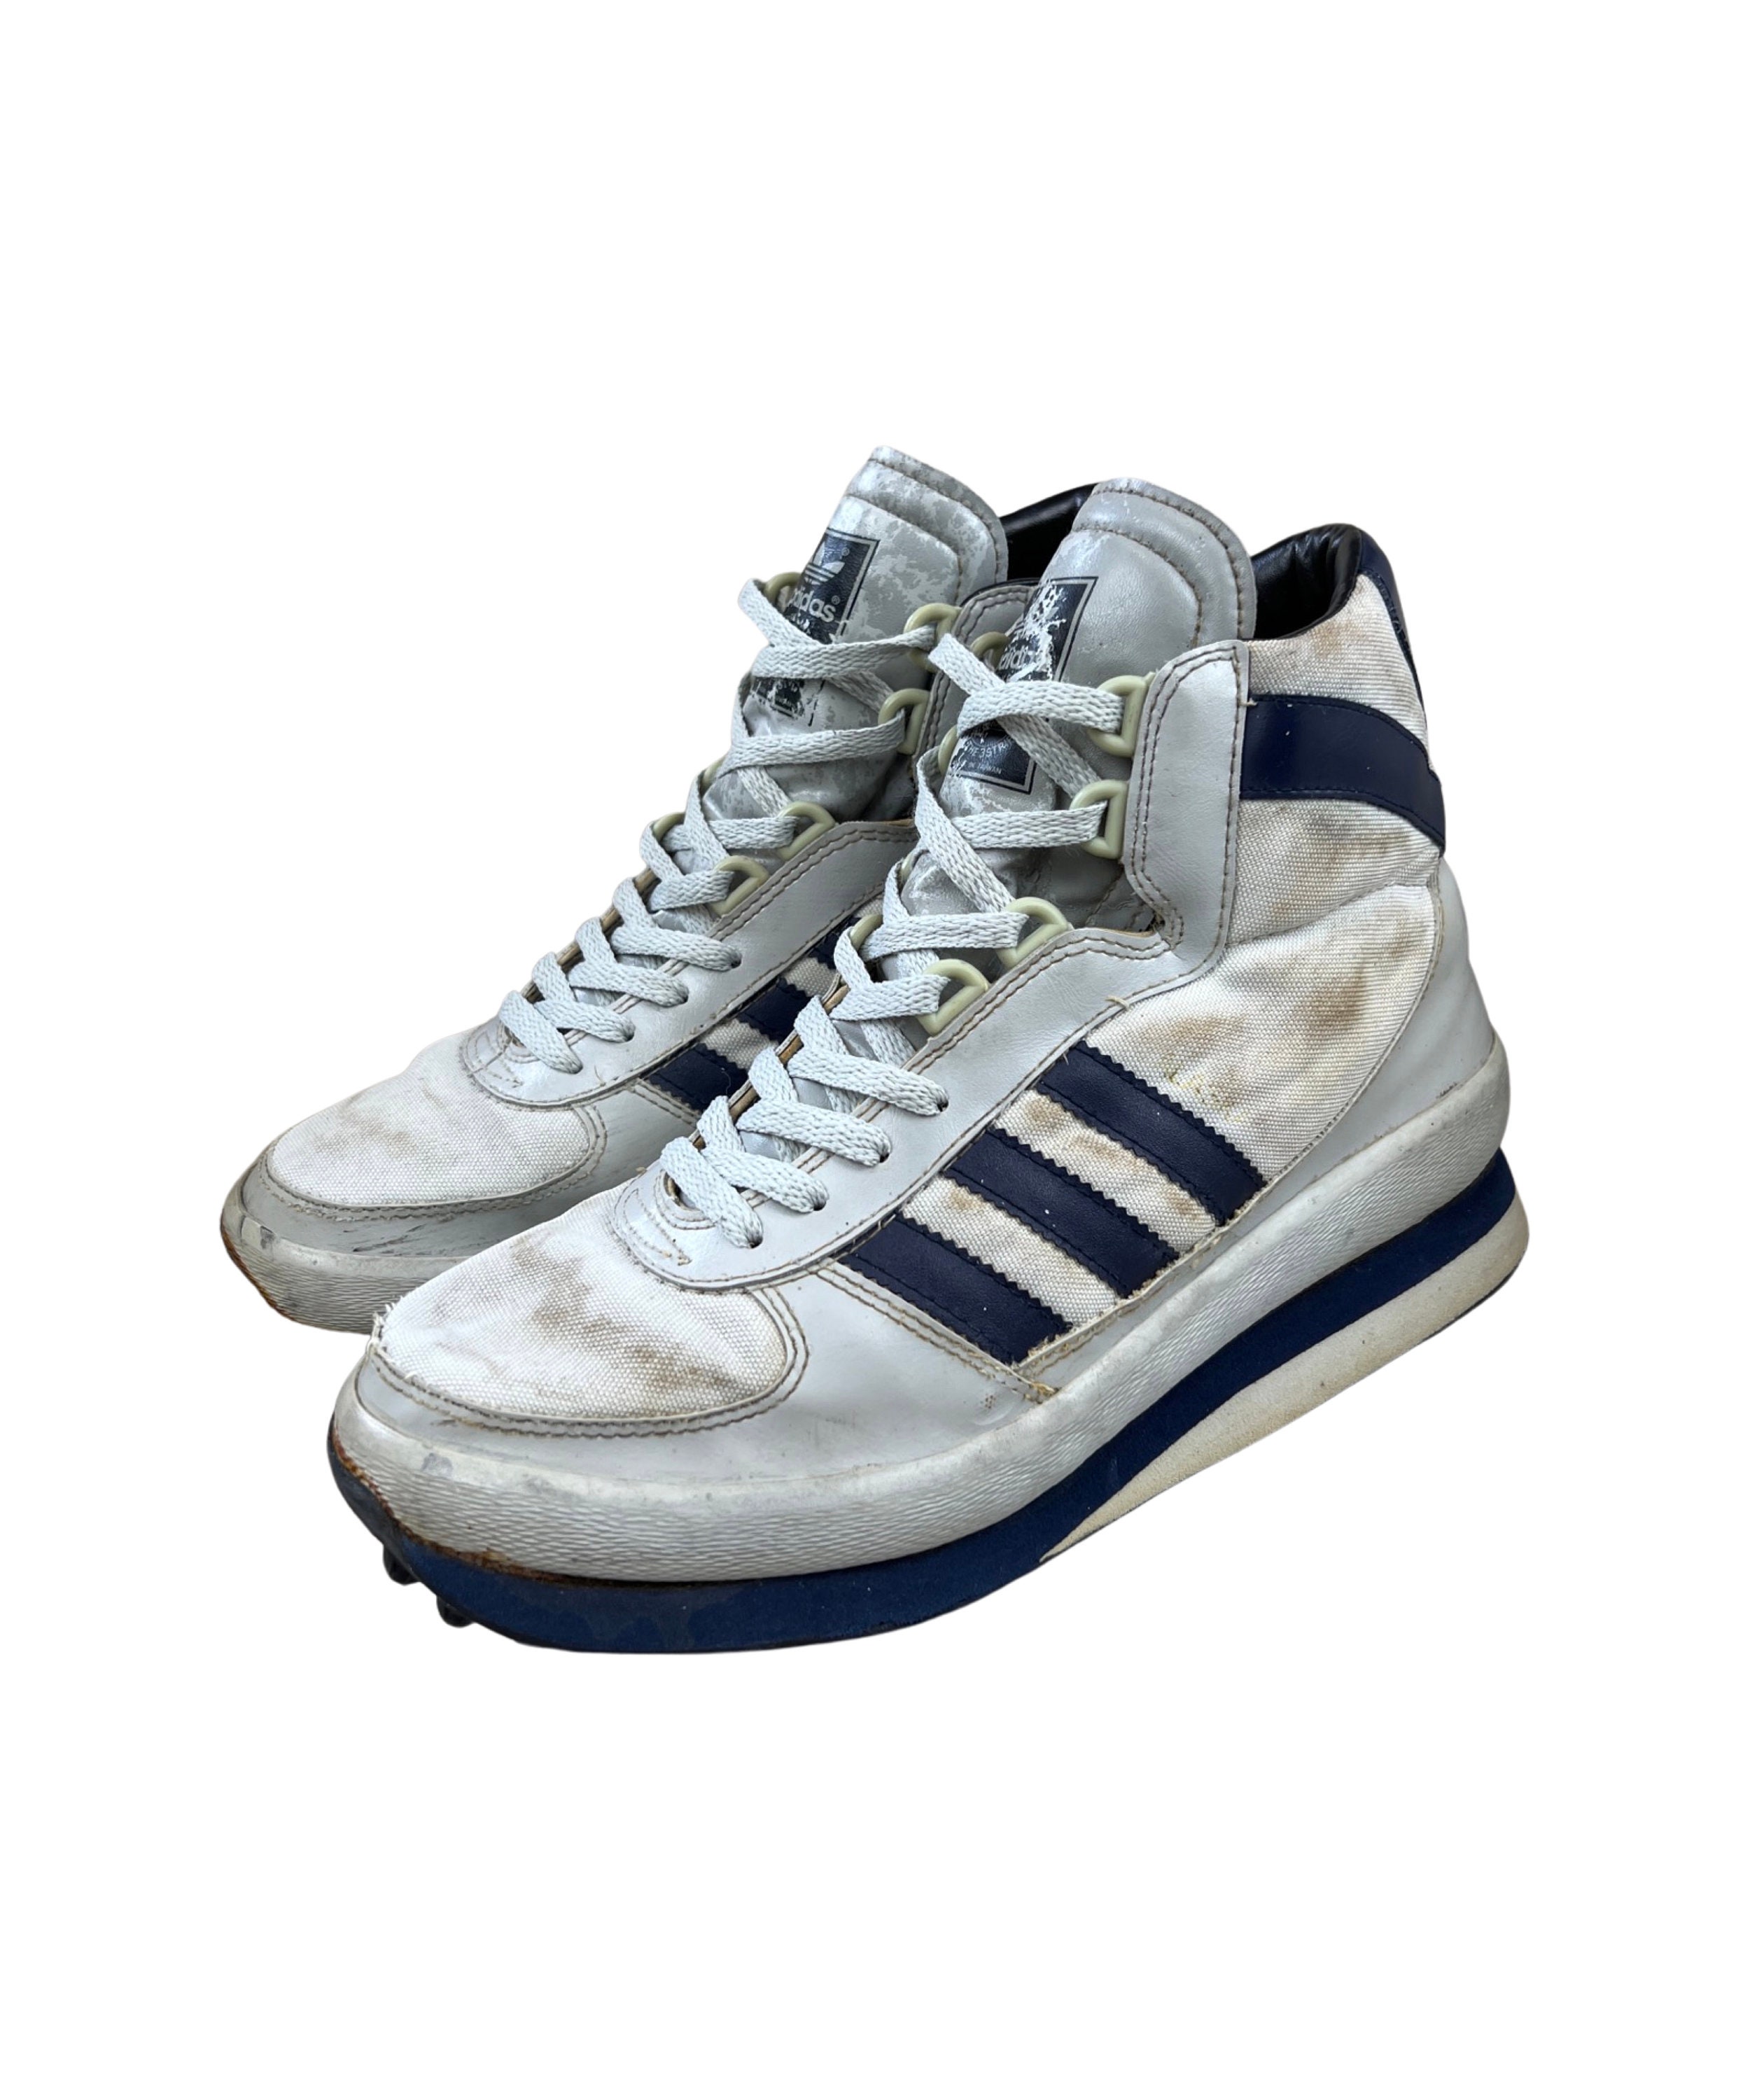 Vintage 80s Adidas Alaska High Top Sneakers Boots - Etsy New Zealand